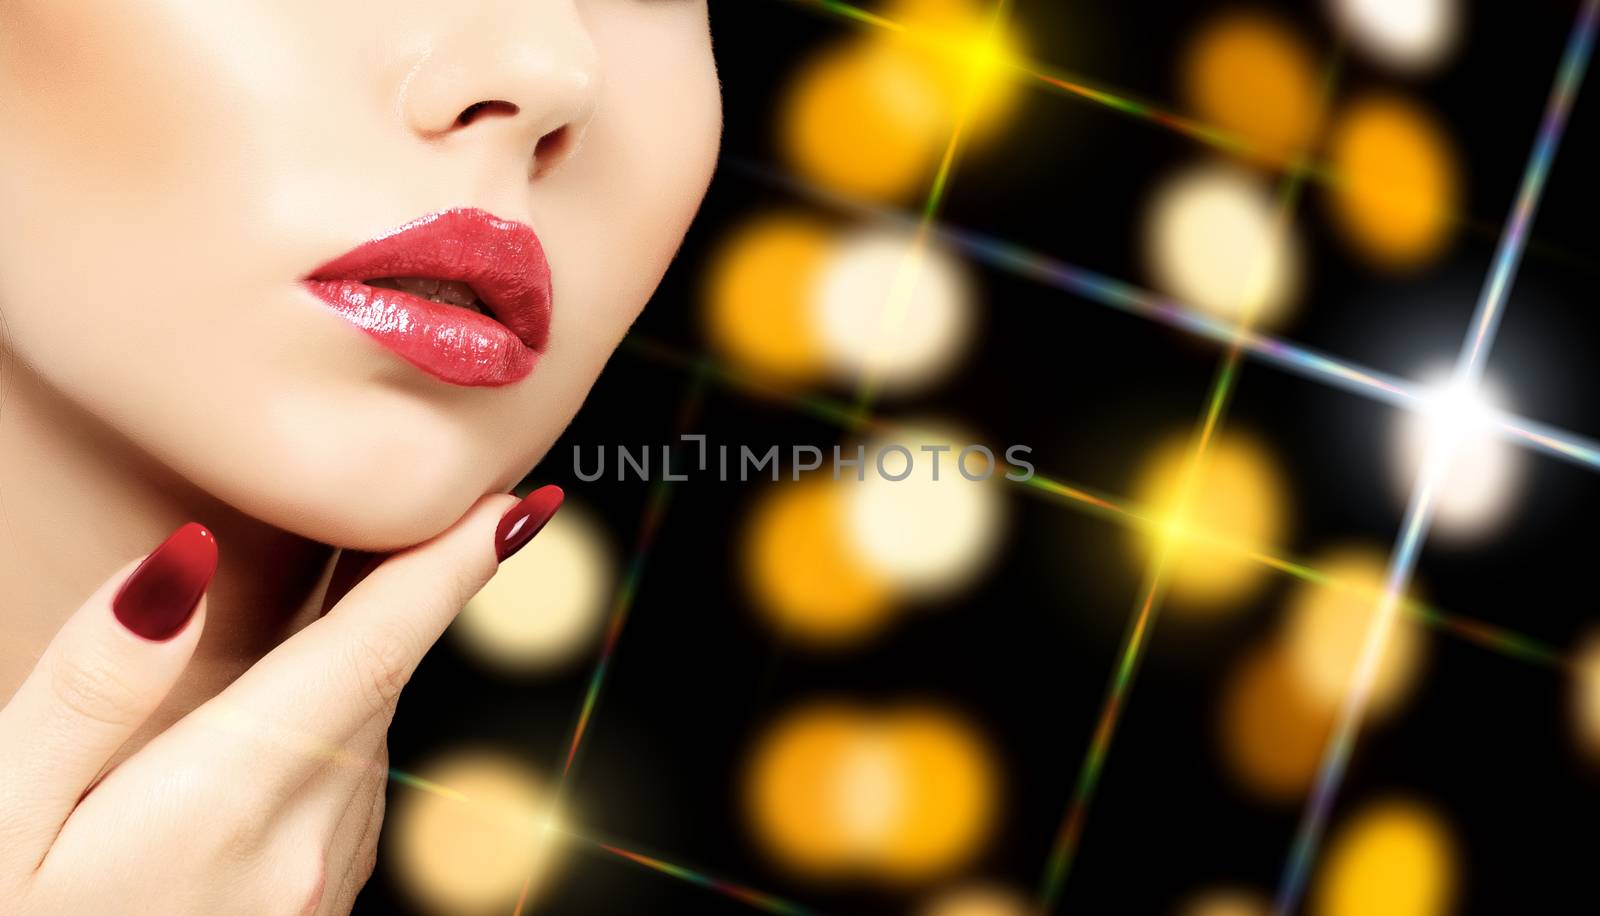 Beautiful woman face against an abstract background by Nobilior